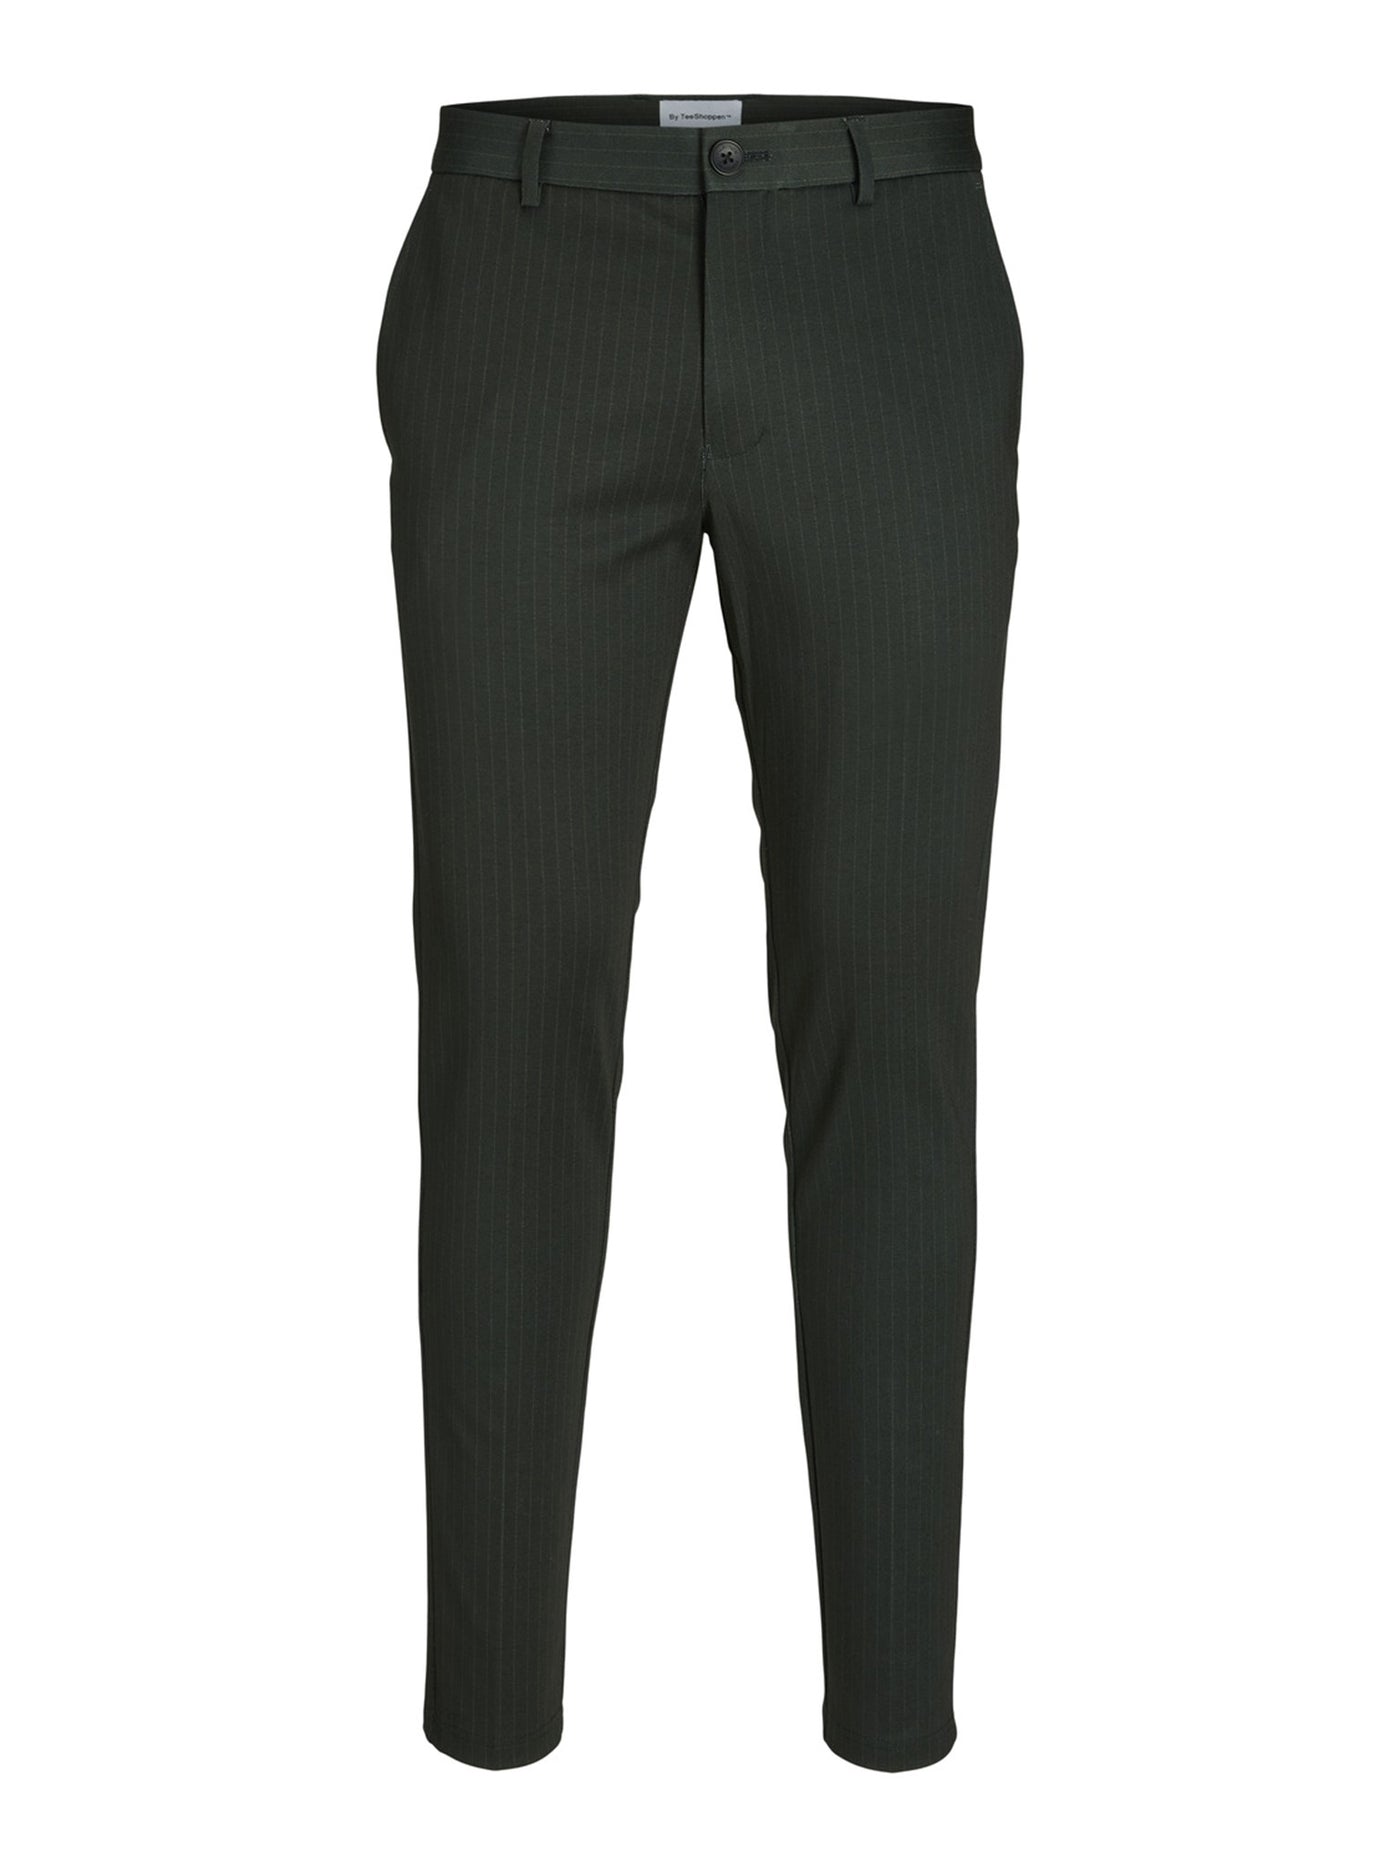 Performance Pants - Forest Night (Limited) - TeeShoppen 7